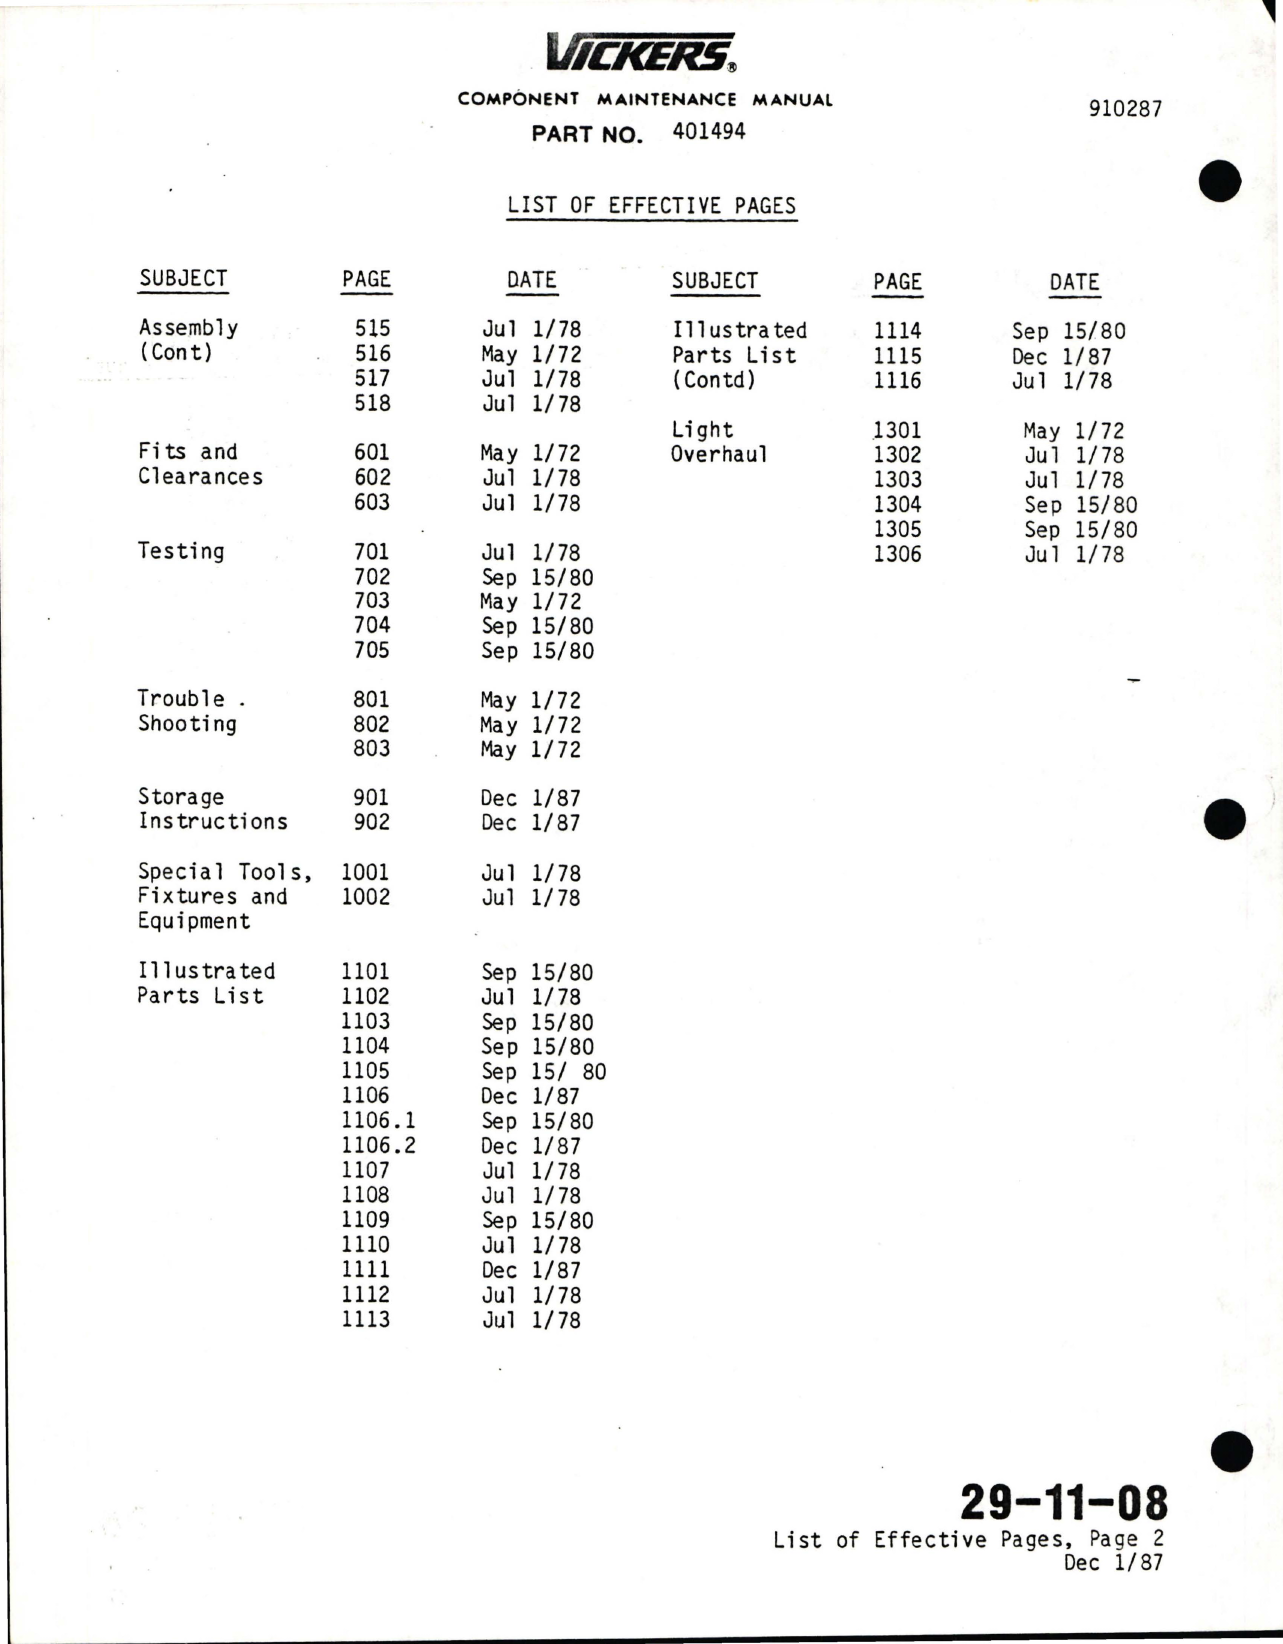 Sample page 8 from AirCorps Library document: Maintenance Manual with Illustrated Parts List for Variable Displacement Hydraulic Motorpump Assembly - Model MPEV3-022-14C, MPEV3-022-14D, and MPEV3-022-14E